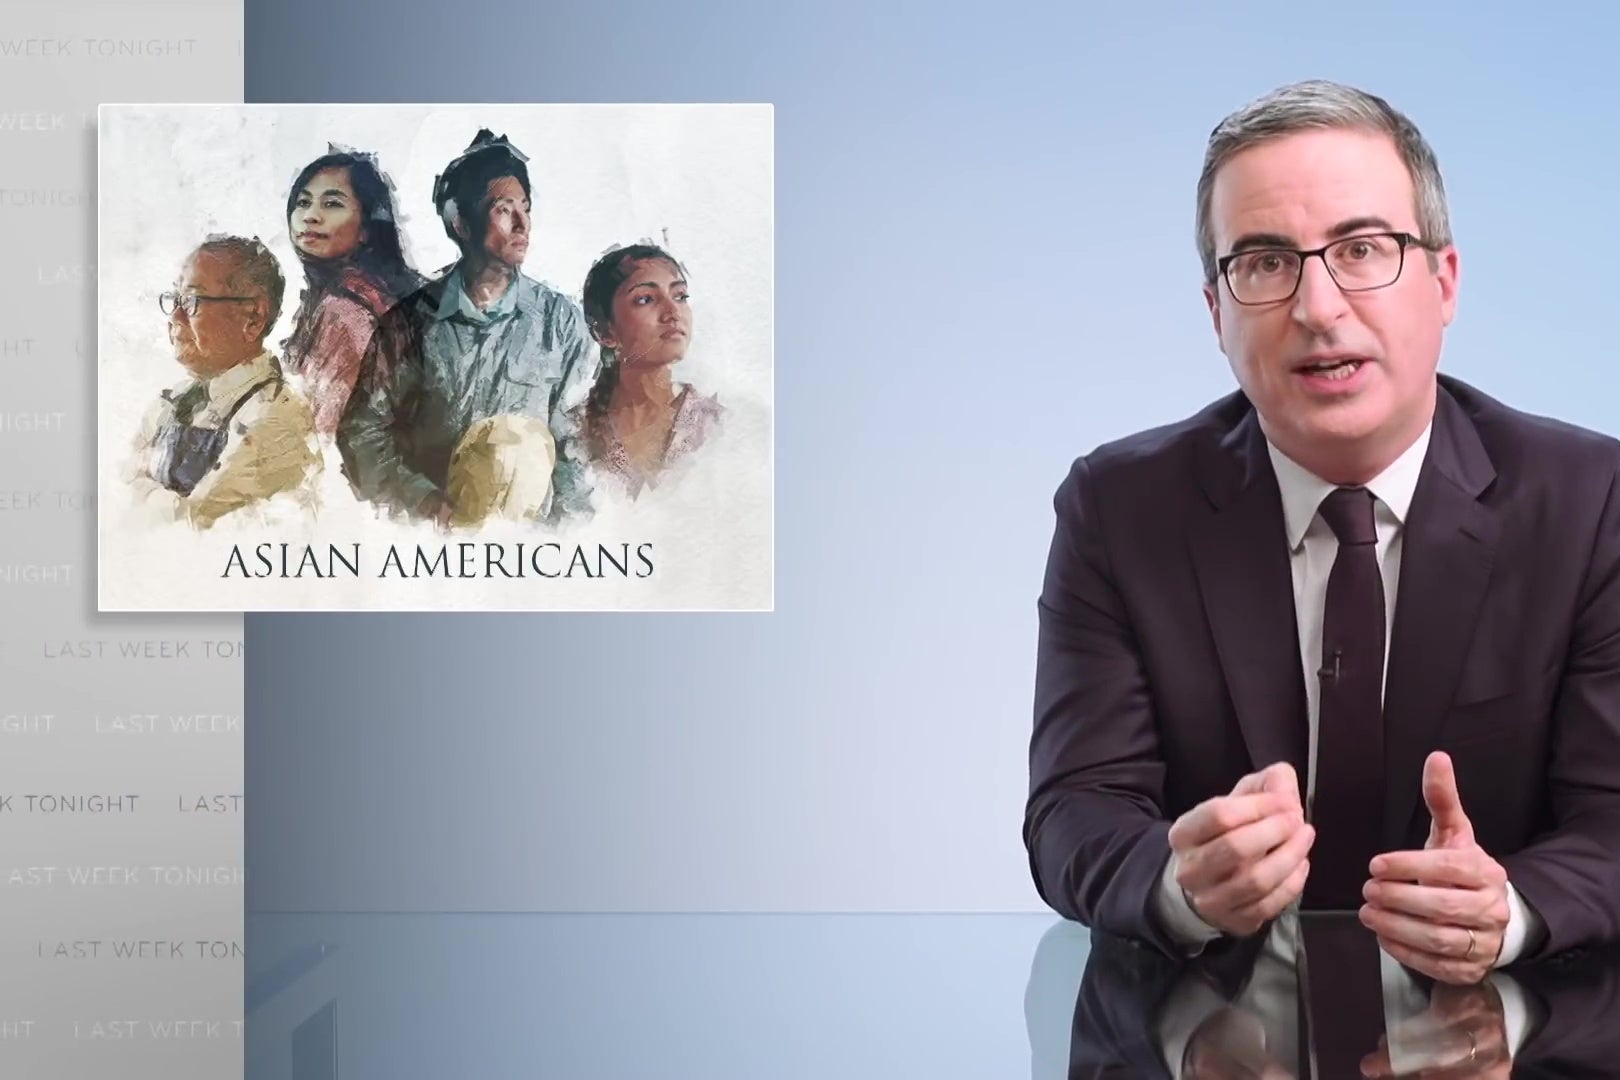 John Oliver sits at his glass anchor desk in front of a chyron reading "Asian Americans."